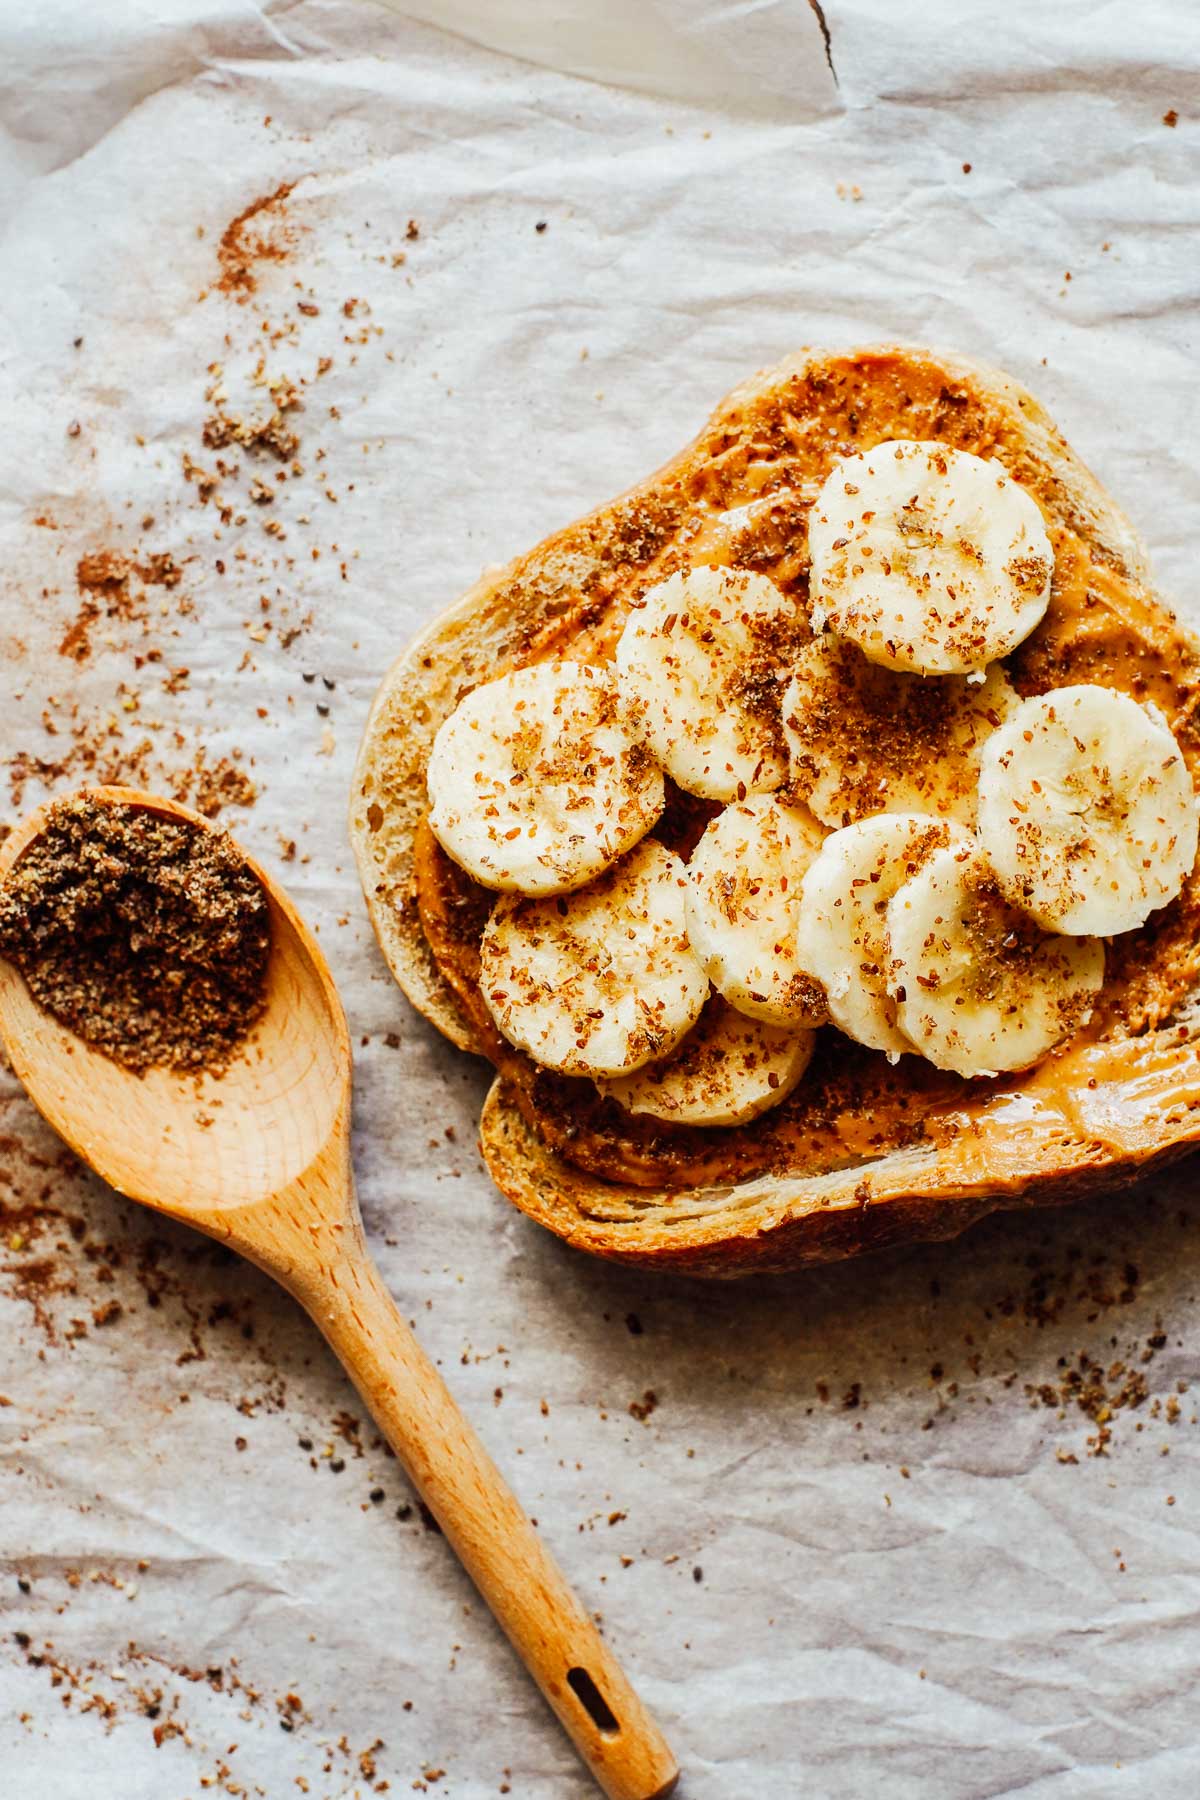 Toast with bananas, peanut butter, and flaxseeds.